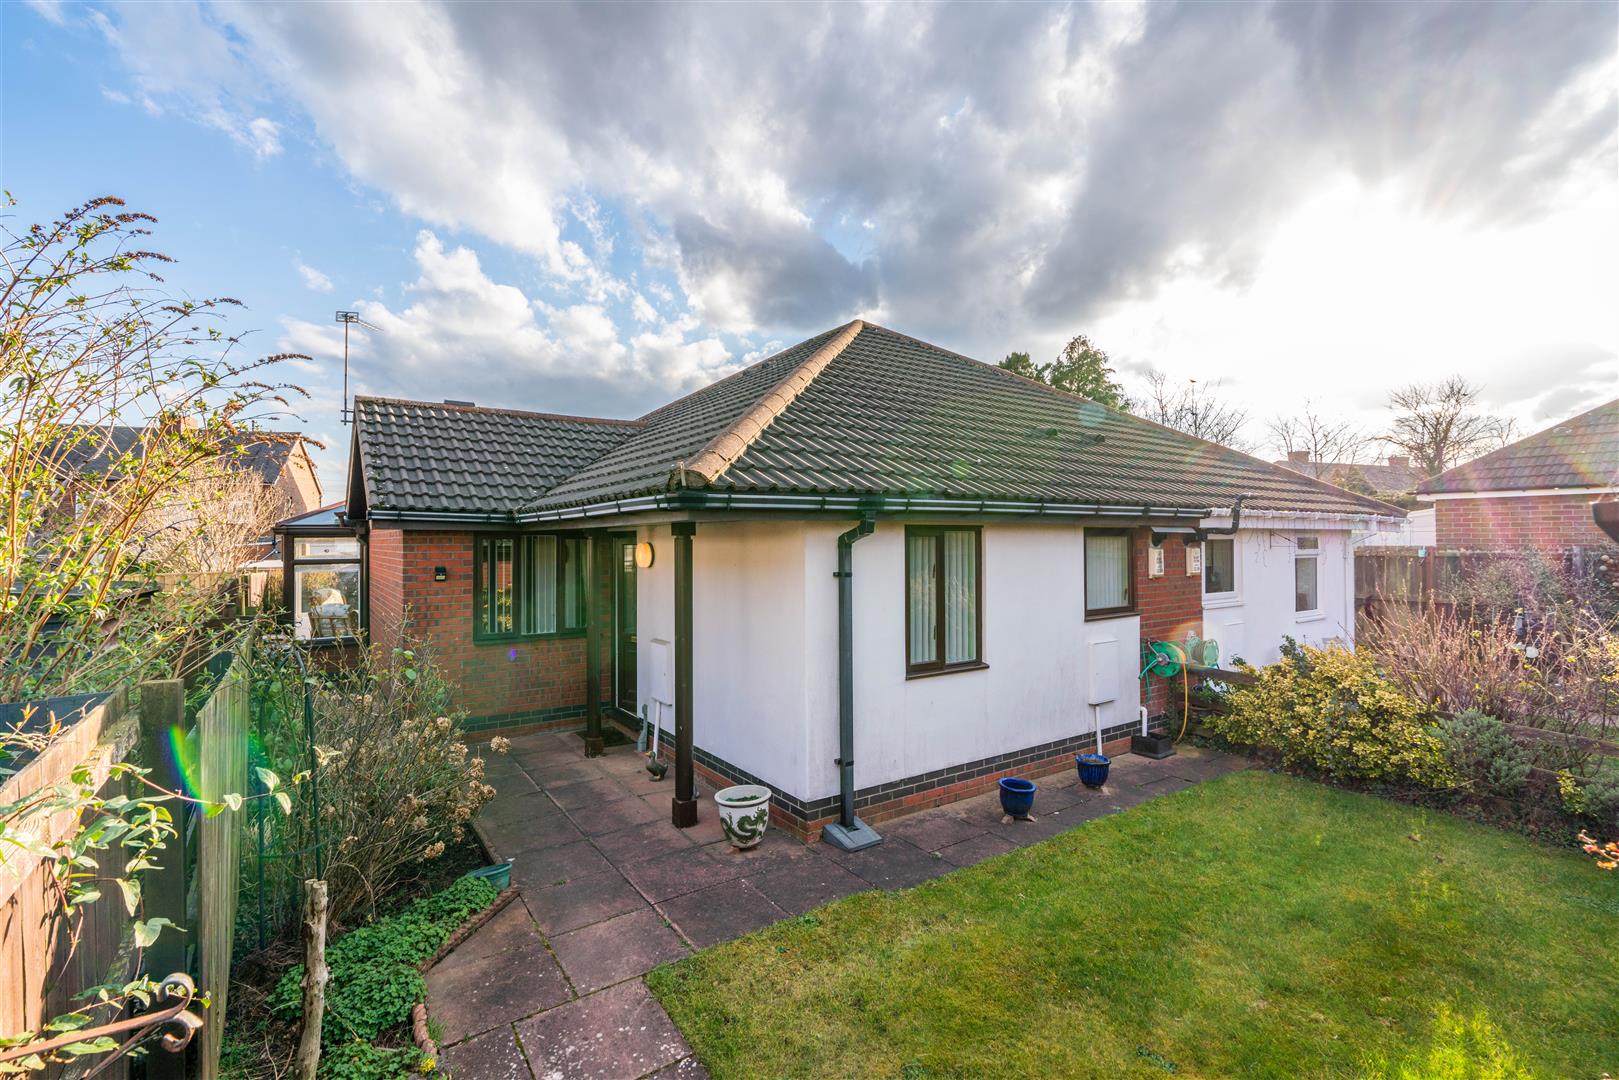 2 bed semi-detached bungalow for sale in Elmwood Mews, North Gosforth - Property Image 1